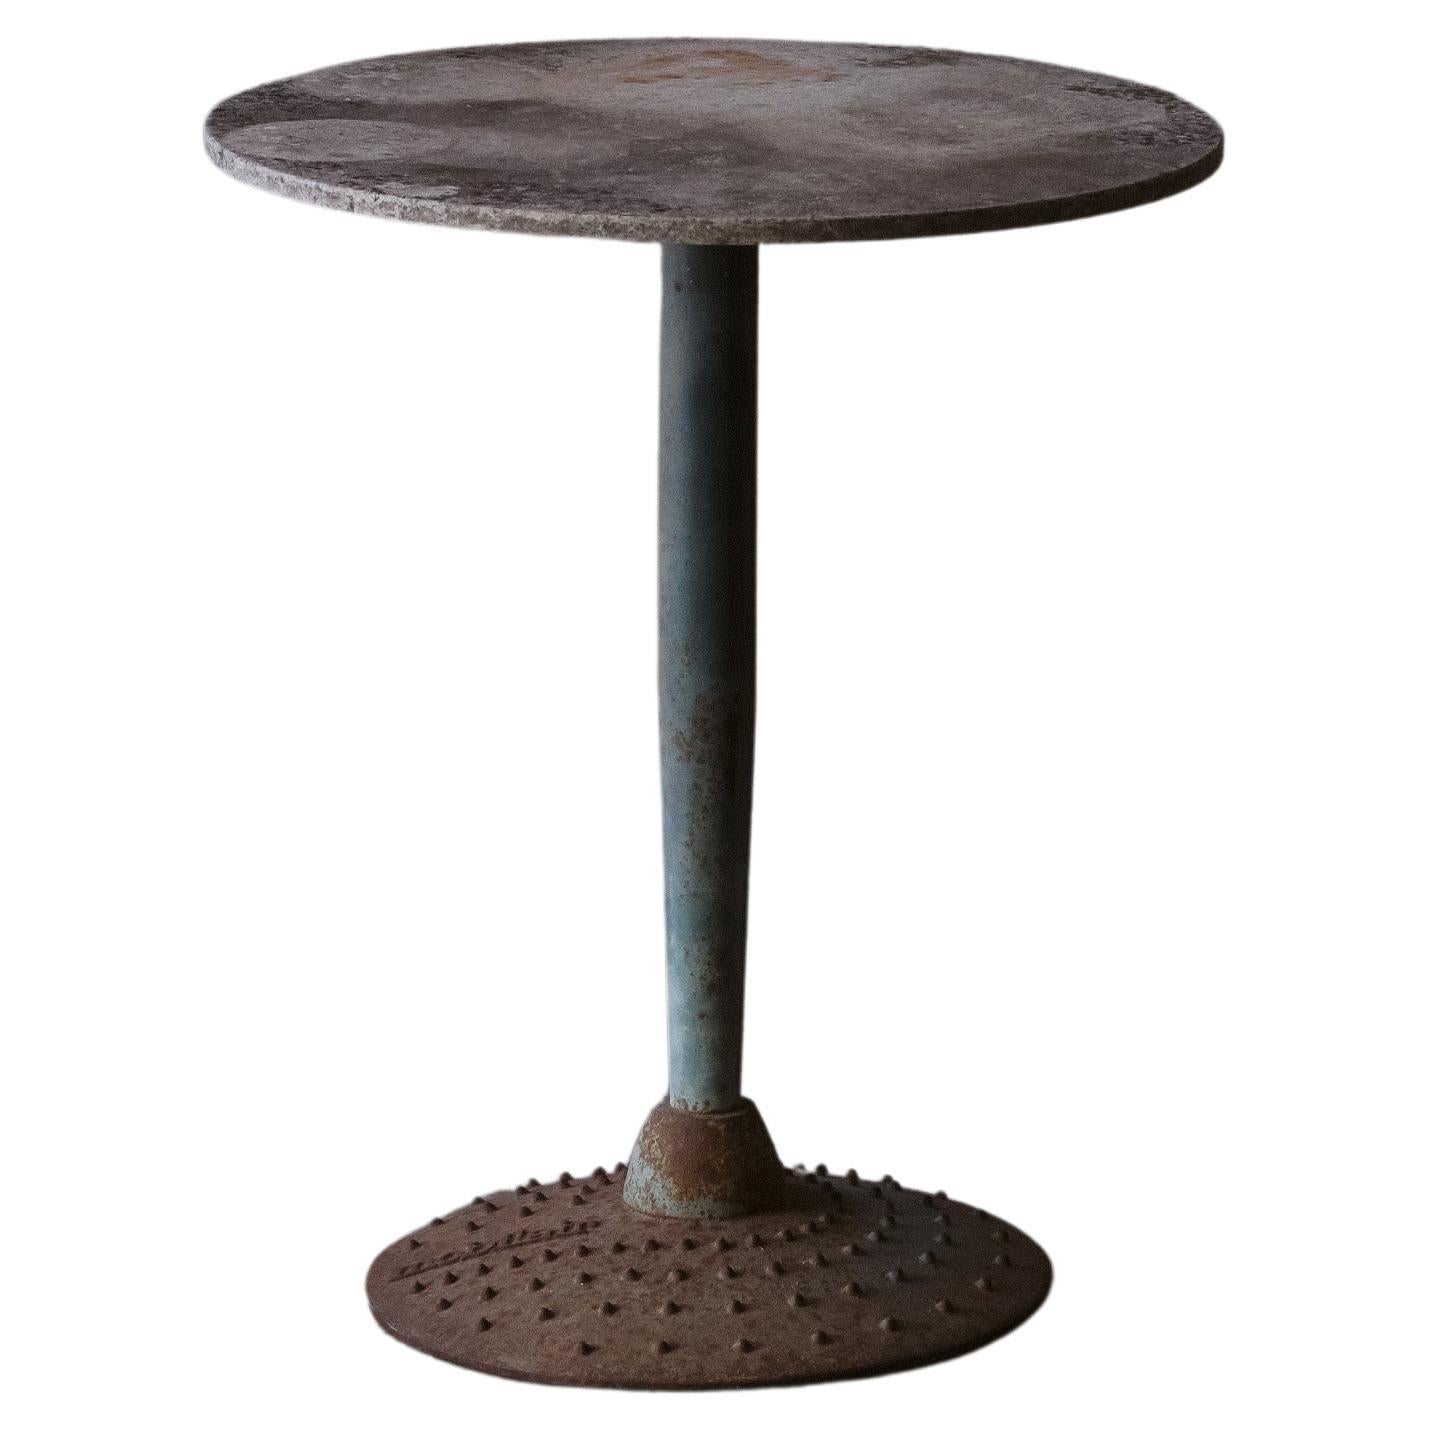 Vintage Stone Bistro Table from France, circa 1960